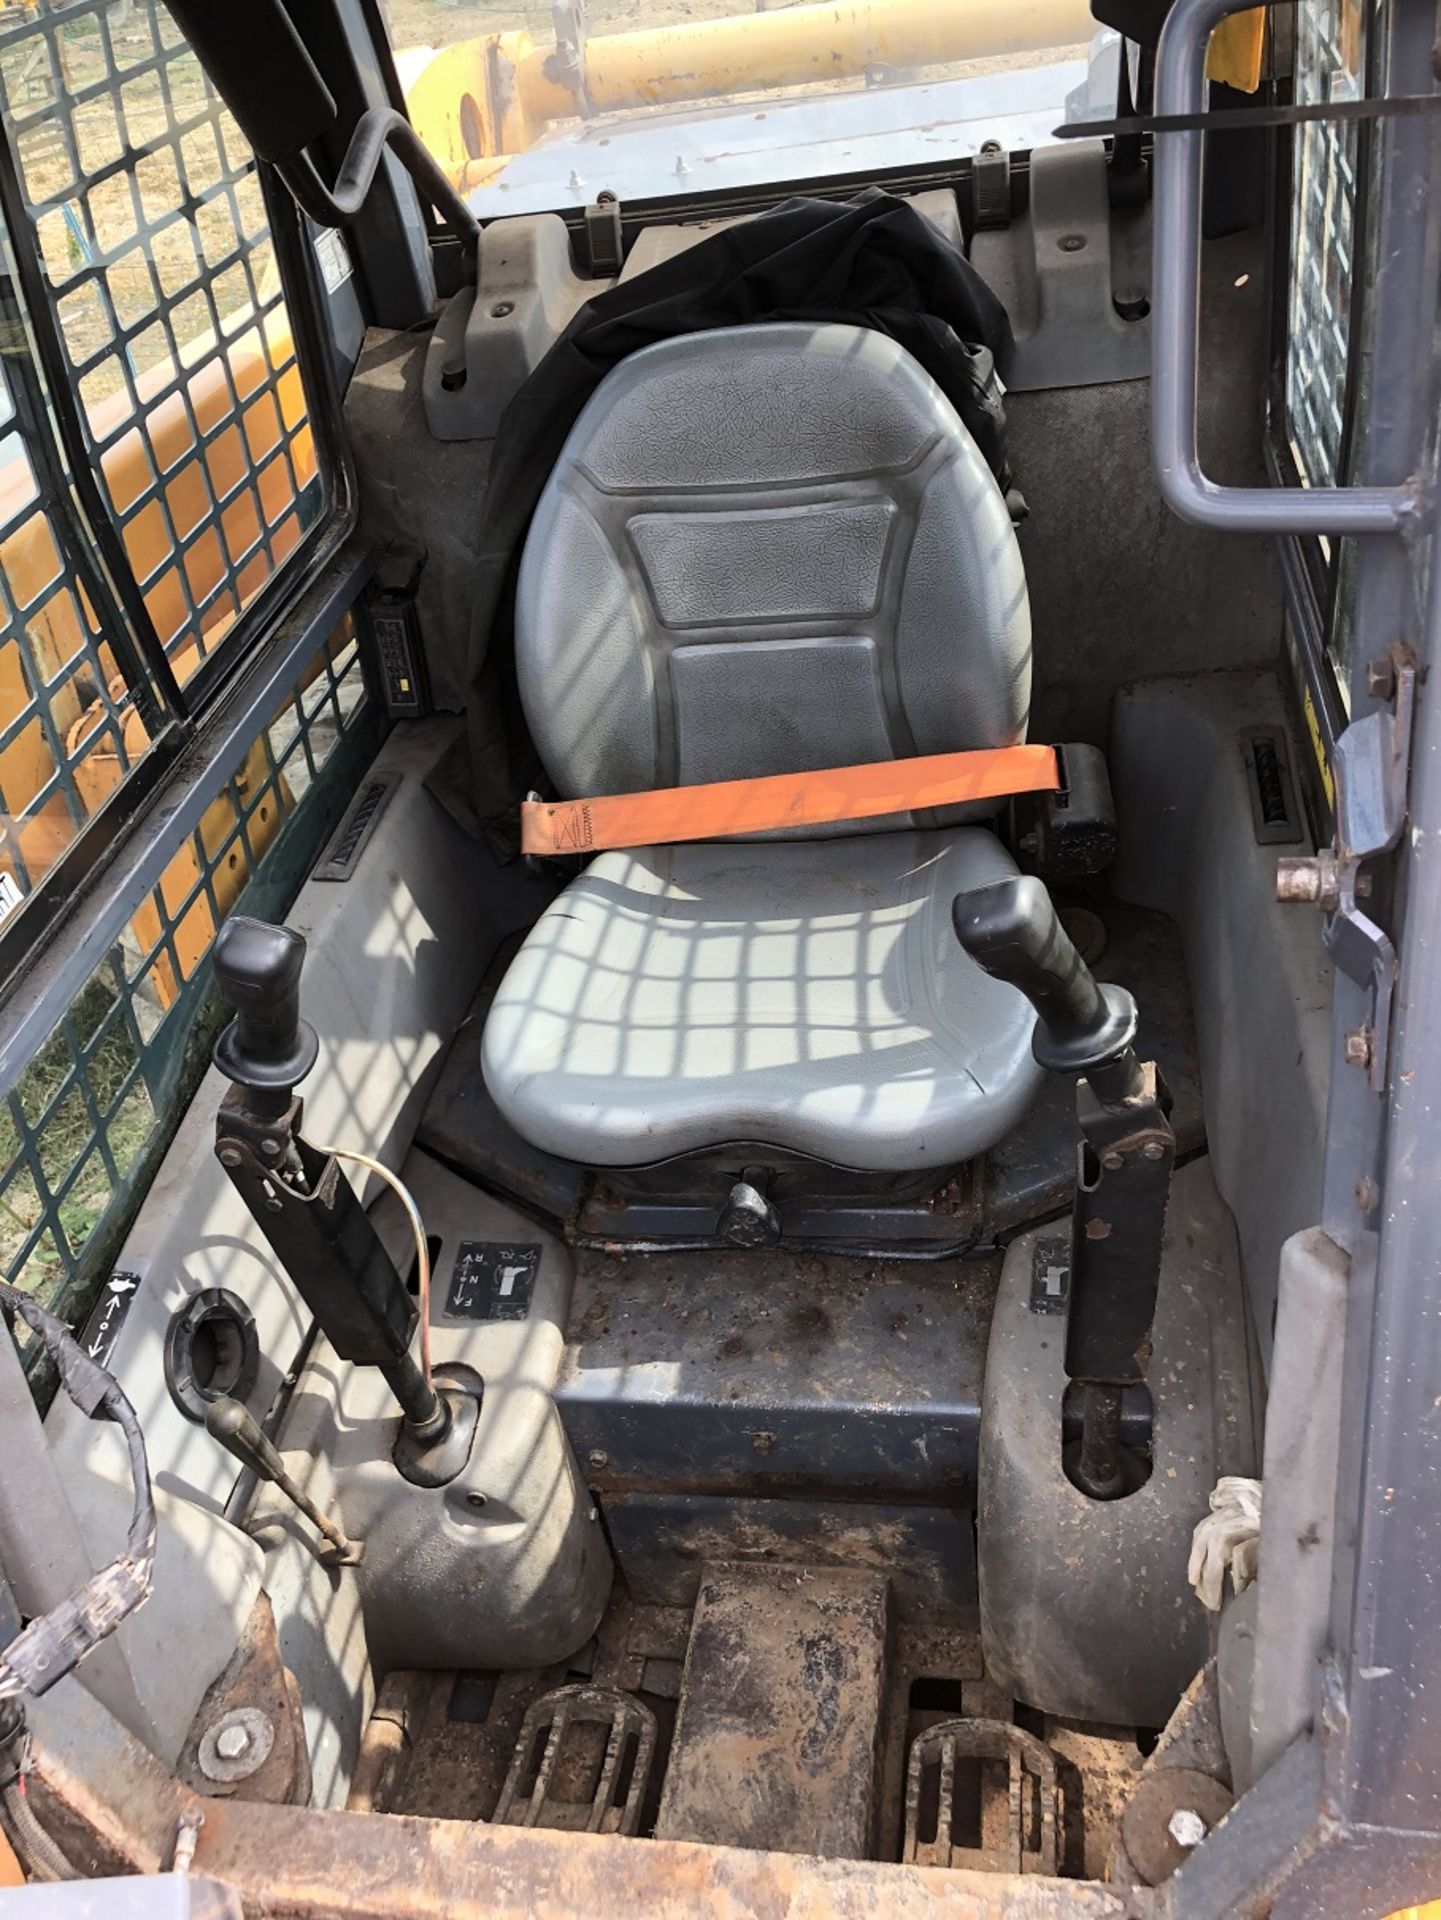 2005 MUSTANG 2107 SKID STEER LOADER WITH FULL ENCLOSED CAB, START, RUNS AND LIFTS *PLUS VAT* - Image 12 of 14